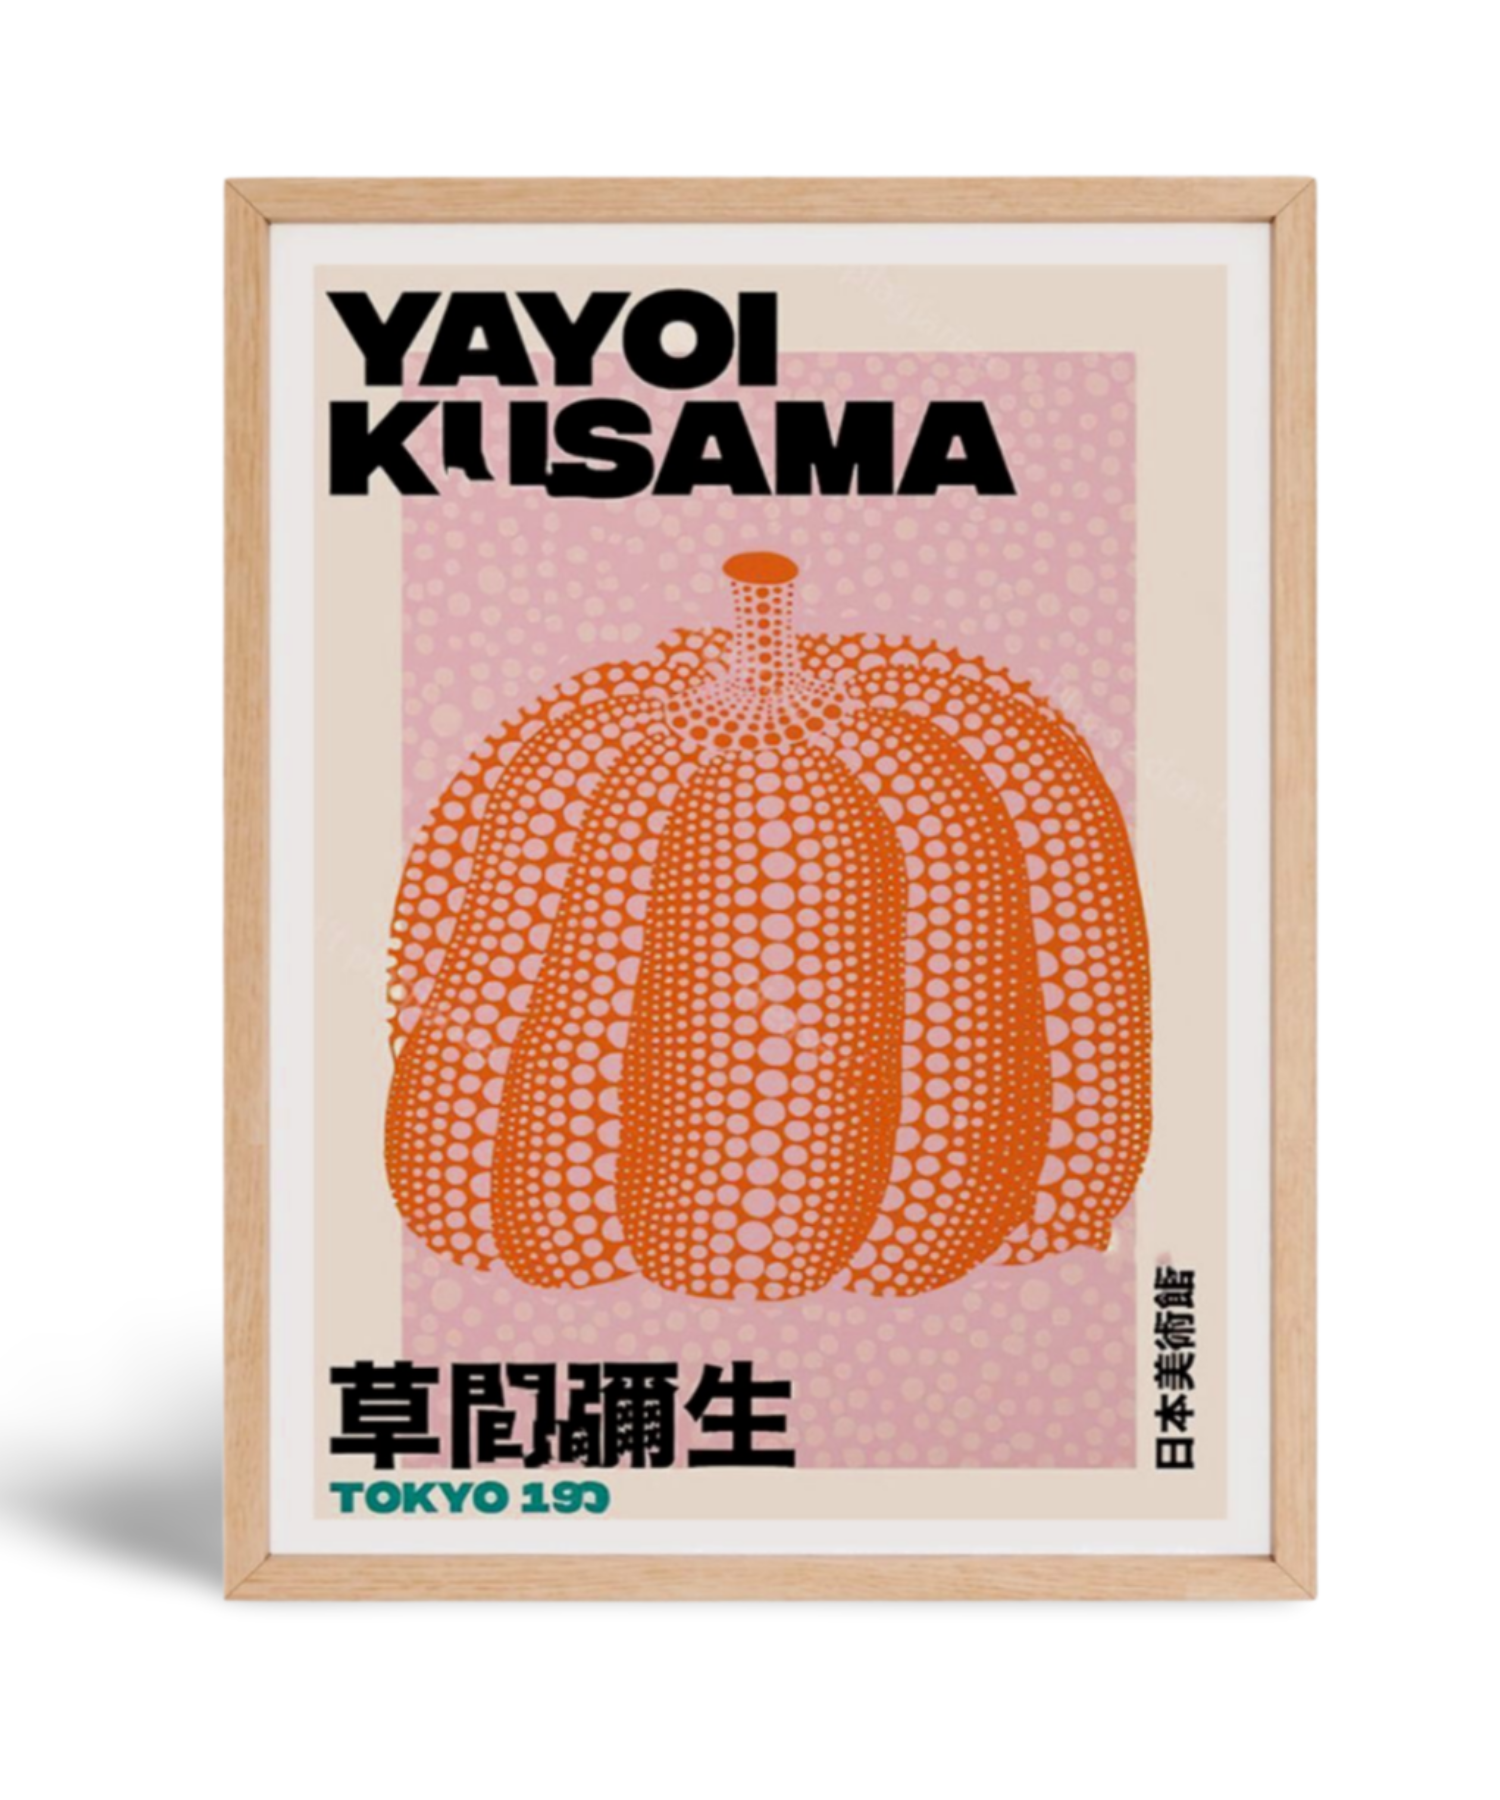 A Yayoi Kusama print with a pumkin in pink and orange colors